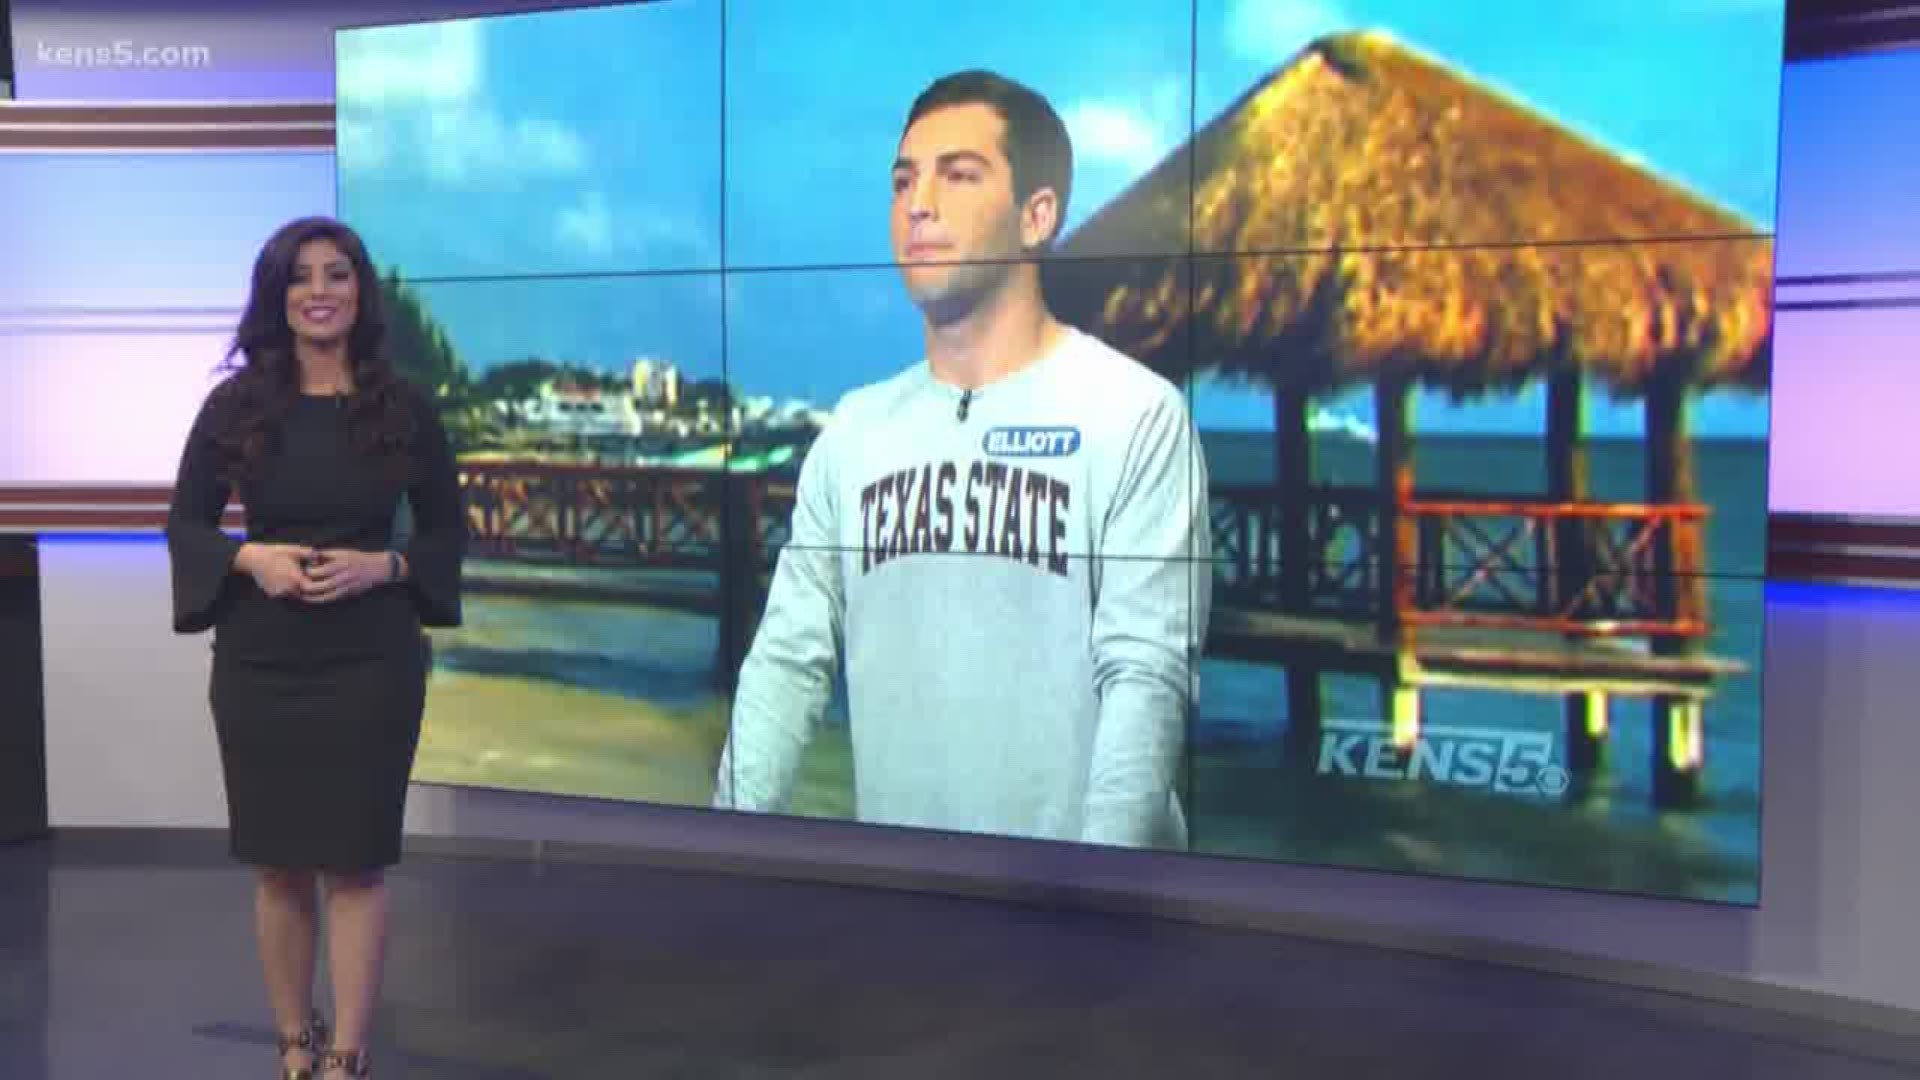 A Texas State student wins big during college week on Wheel of Fortune. He made it to the bonus round and won more than $60k and won a trip to the Amazon.